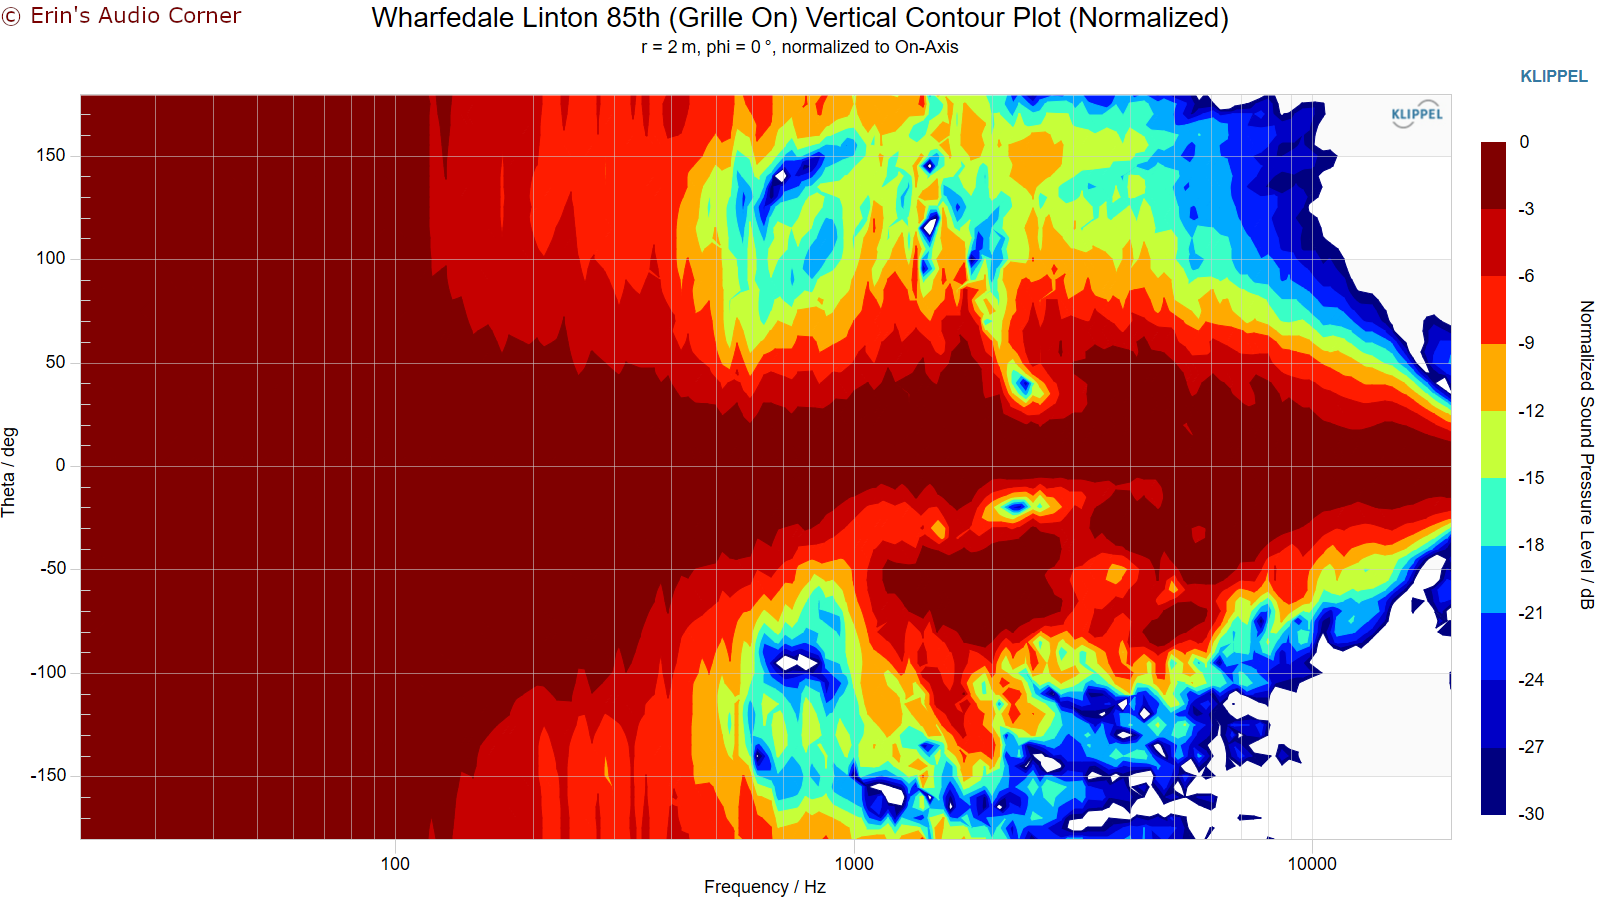 Wharfedale Linton 85th (Grille On) Vertical Contour Plot (Normalized).png